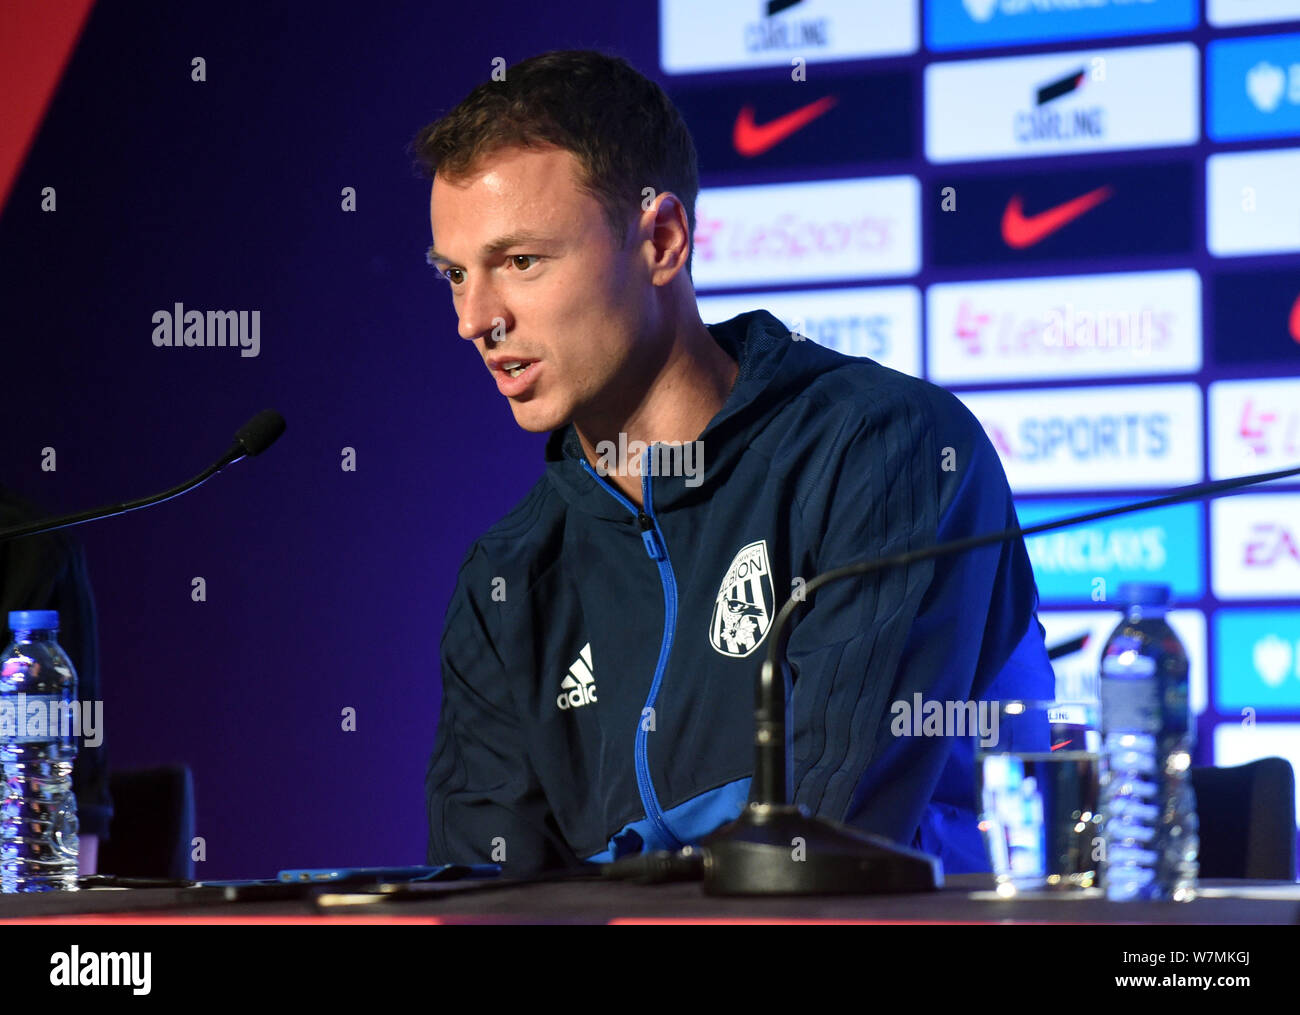 Northern Irish football player Jonny Evans of West Bromwich Albion F.C. attends a press conference for the 2017 Premier League Asia Trophy against Lei Stock Photo